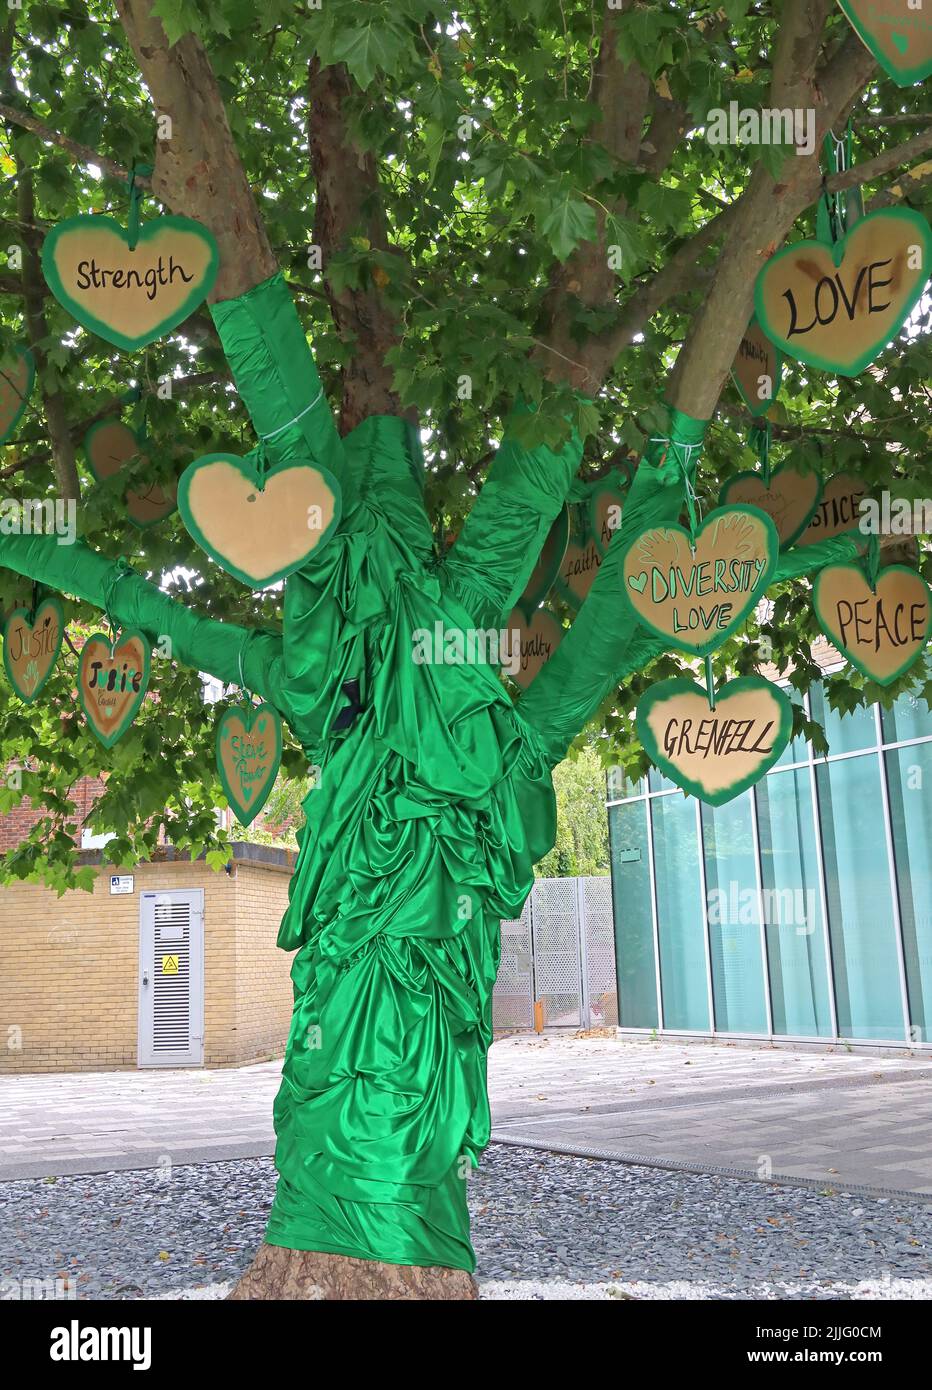 Grenfell fire memorial,Green tree of hearts and messages,green for Grenfell, outside North Kensington leisure centre, London,England Stock Photo